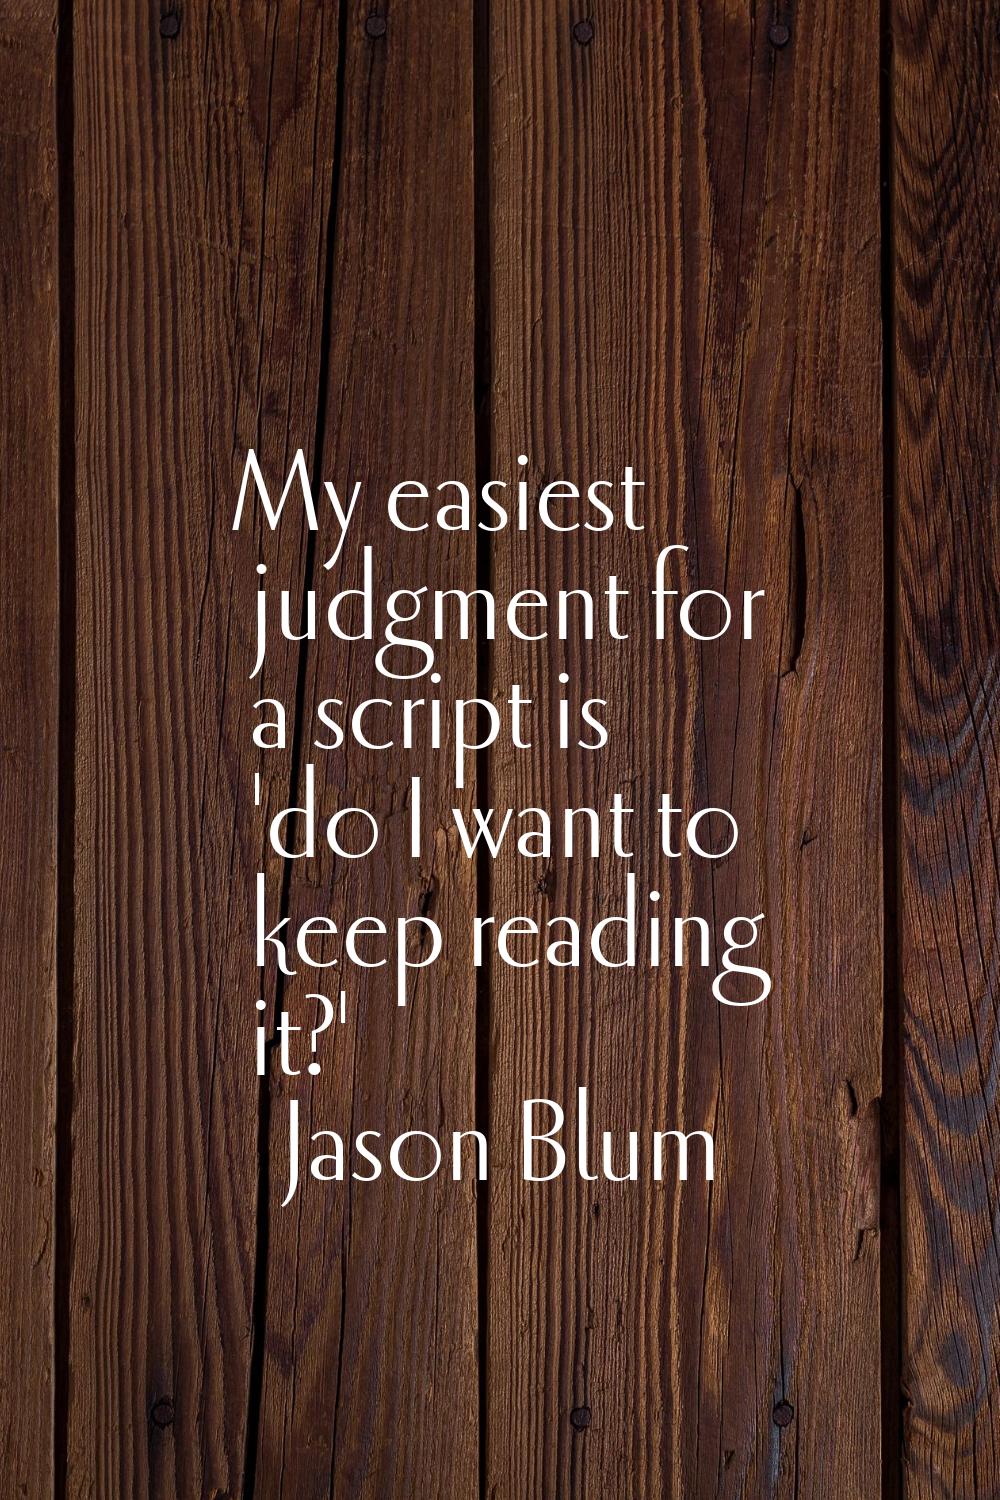 My easiest judgment for a script is 'do I want to keep reading it?'